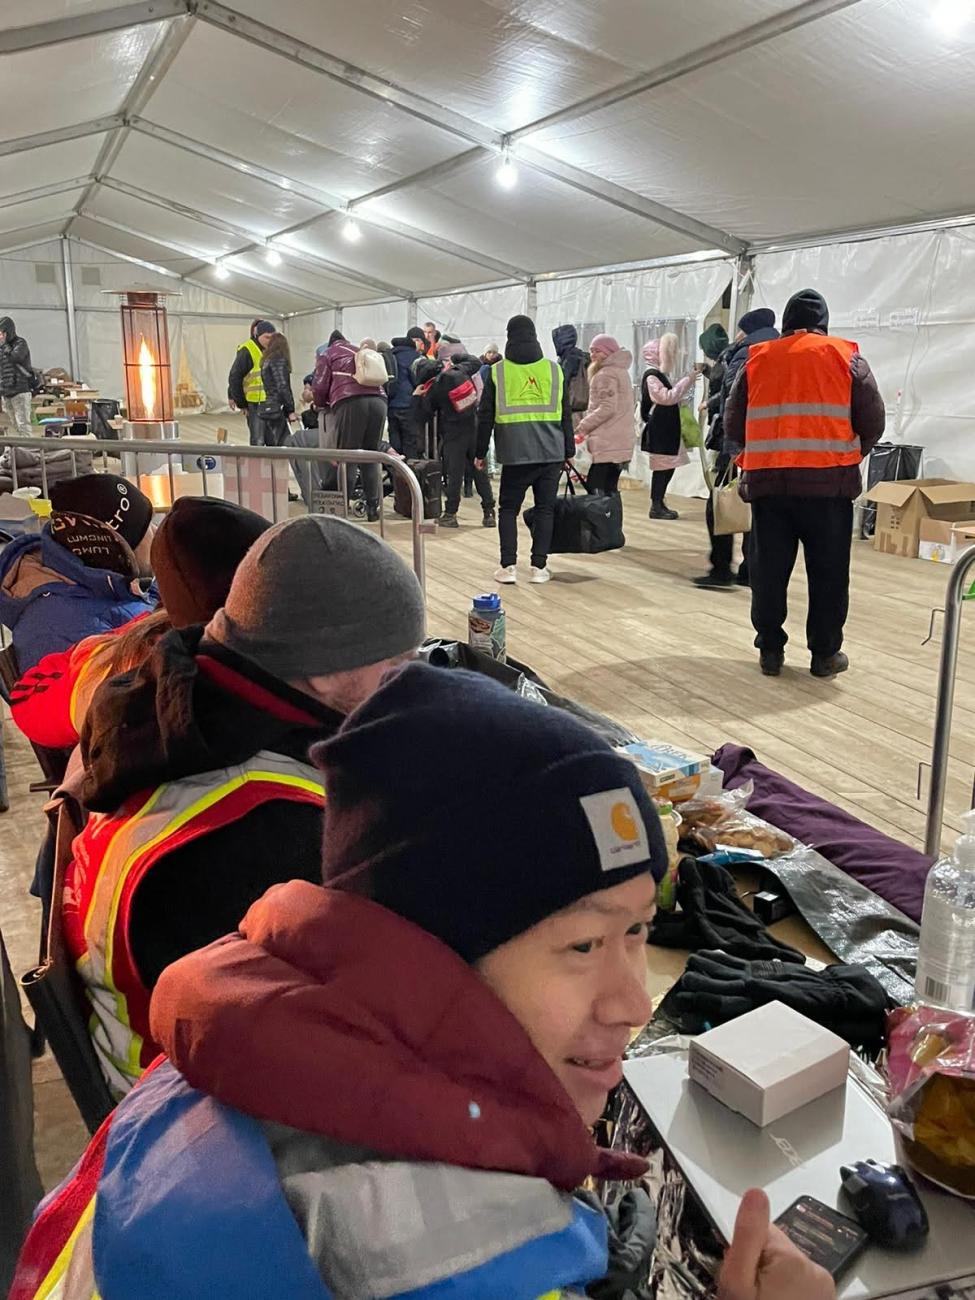 The author, Dr. Anthony Fong, bundled up in a warm hat and puffy jacket, sits at a table while on night shift with a team from Toronto-based, disaster-relief charity Canadian Medical Assistance Teams, at their pop-up clinic in Krakovets, near the Polish-Ukraine border in Lviv Oblast, Ukraine, March 2022.